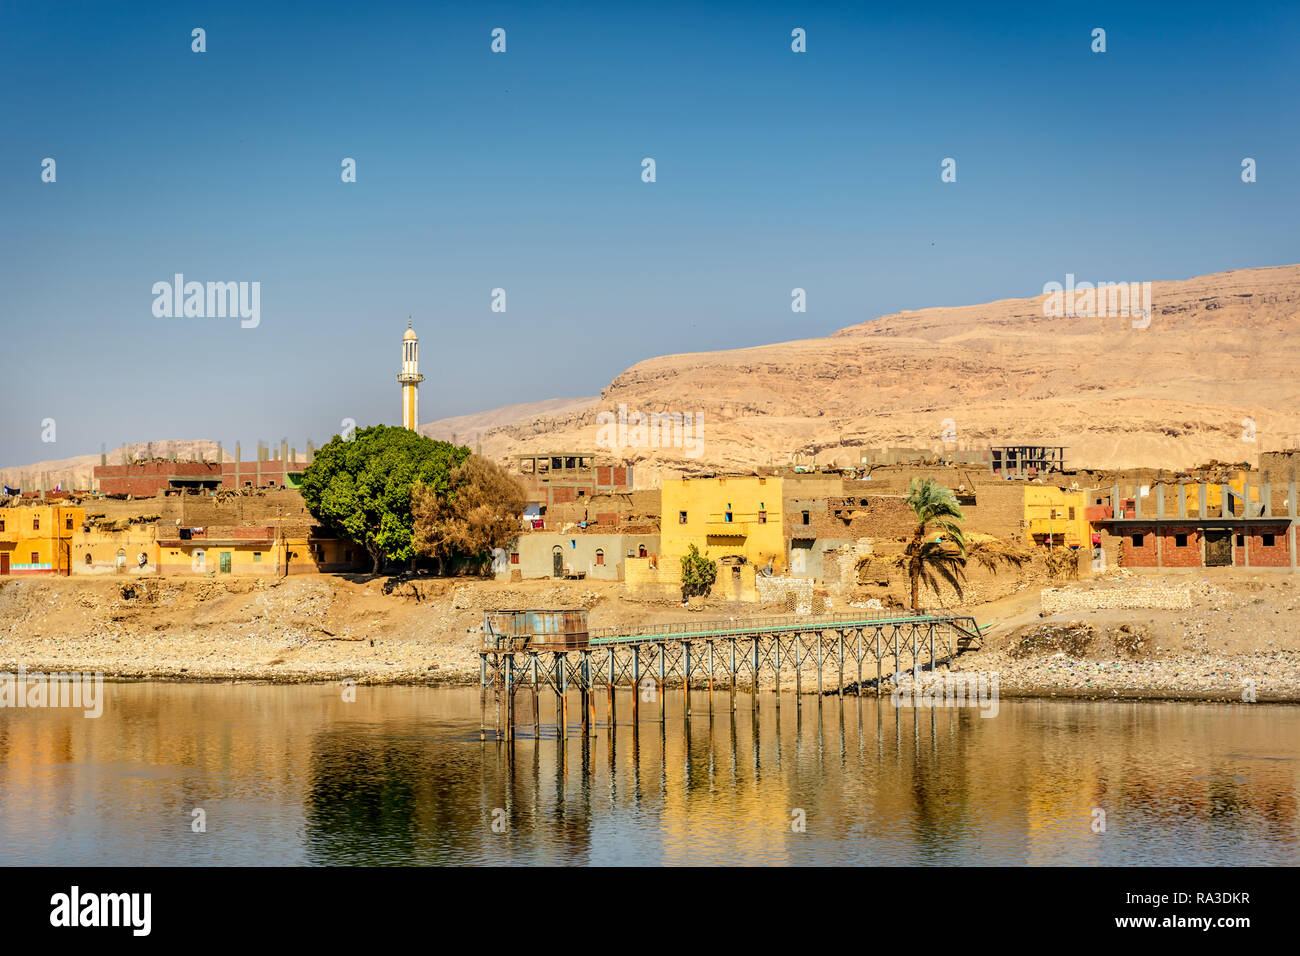 Nile river, Egypt - Nov 7th 2018 - Few houses and a mosque's minaret in the Nile river edge in a dry environment in Egypt Stock Photo